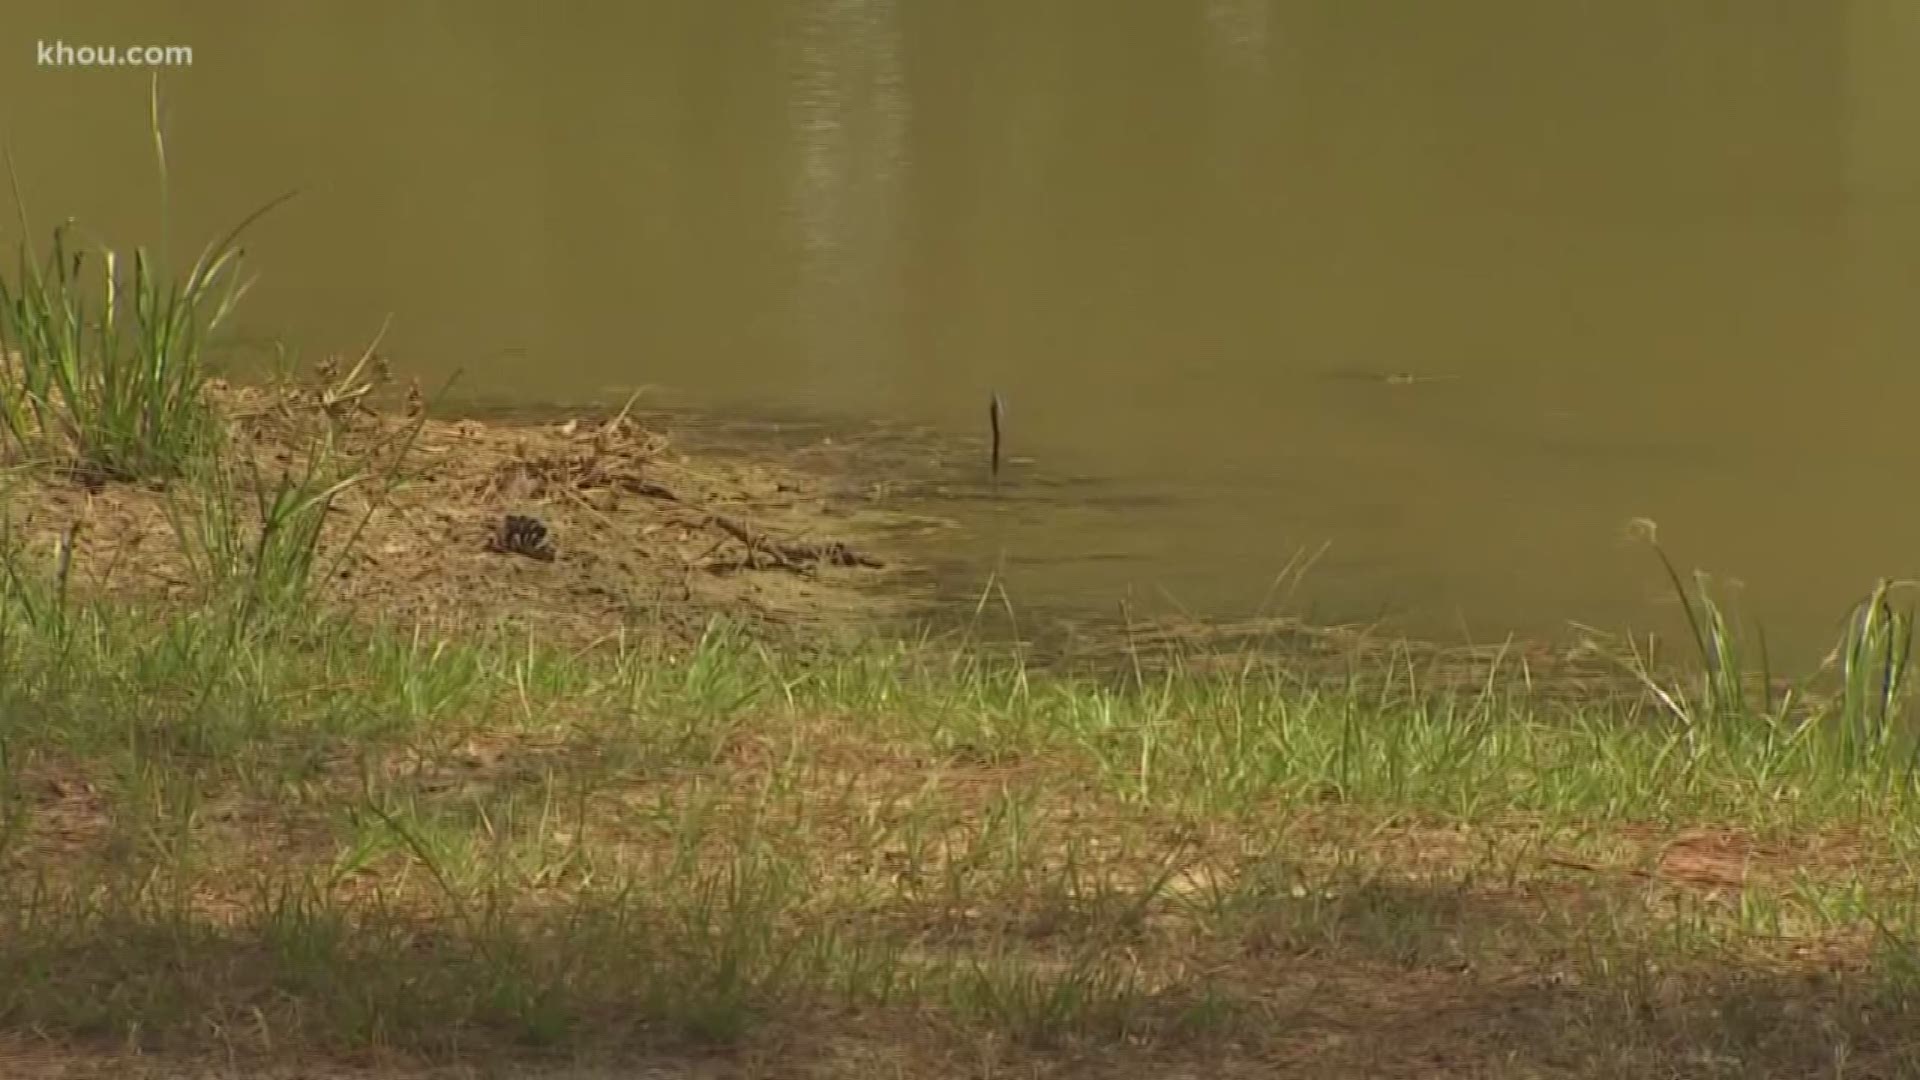 The Montgomery County Sheriff's Office said two boys, ages 3 and 4, drowned in a small pond in Montgomery County Thursday night.